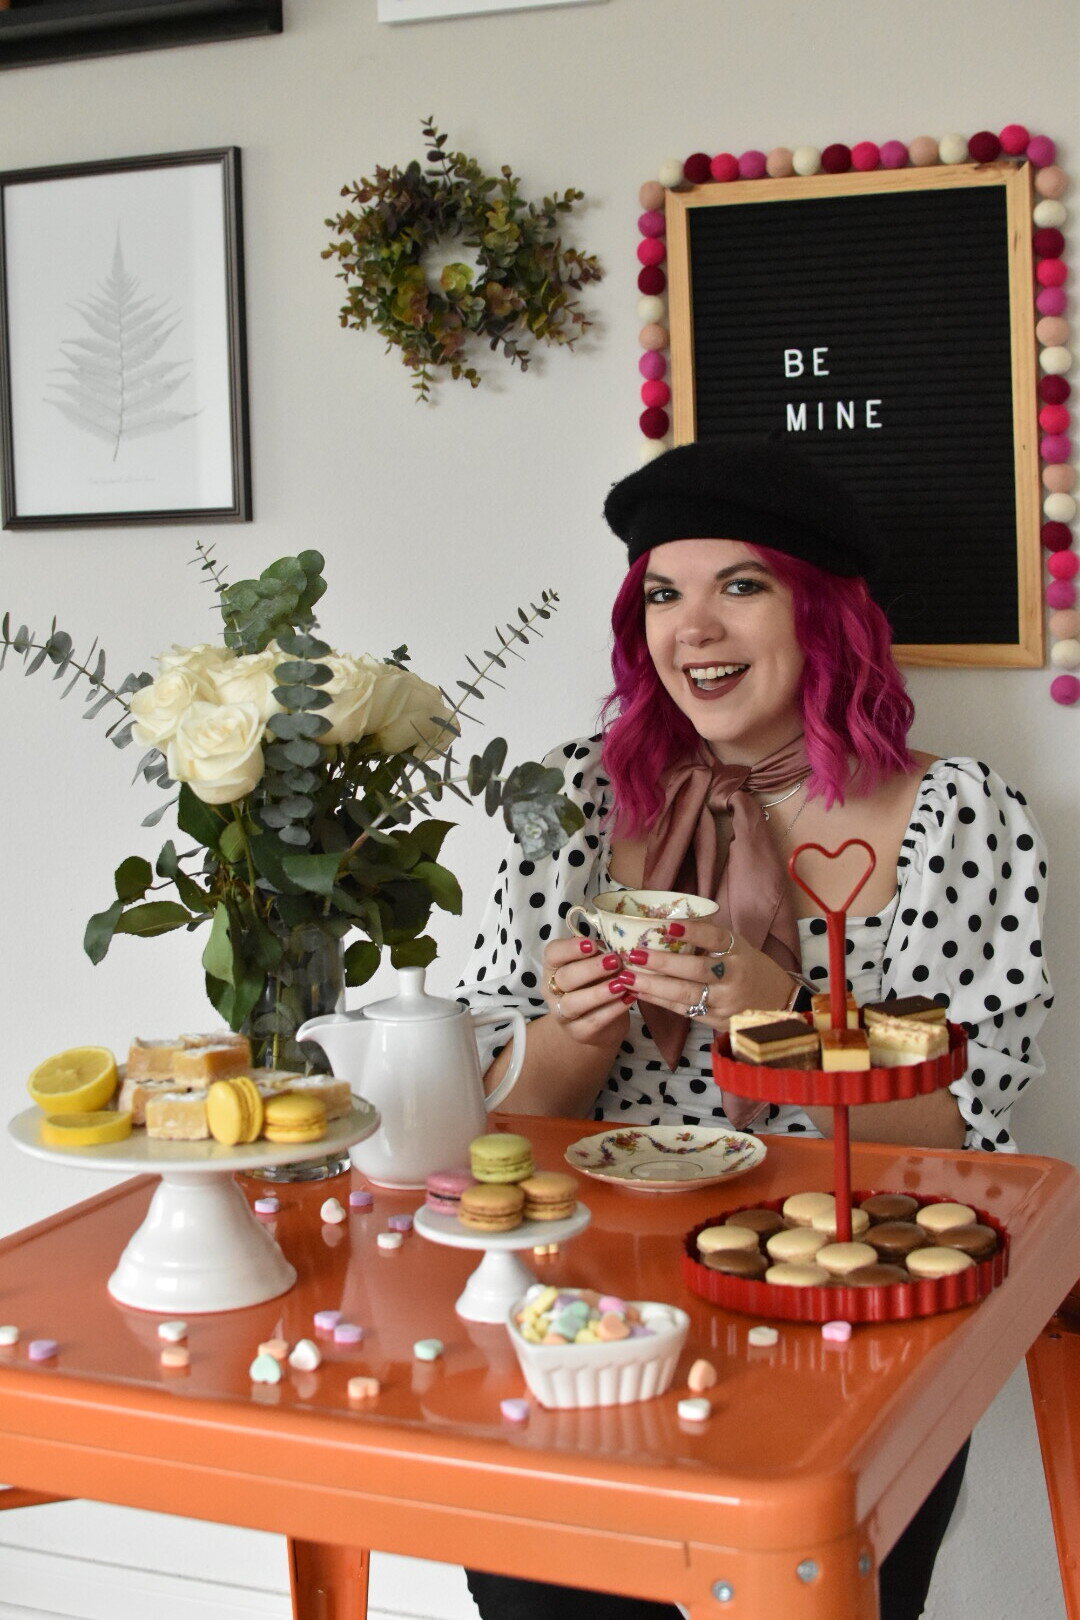 HOW TO THROW A VALENTINE'S DAY THEMED TEA PARTY UNDER $50